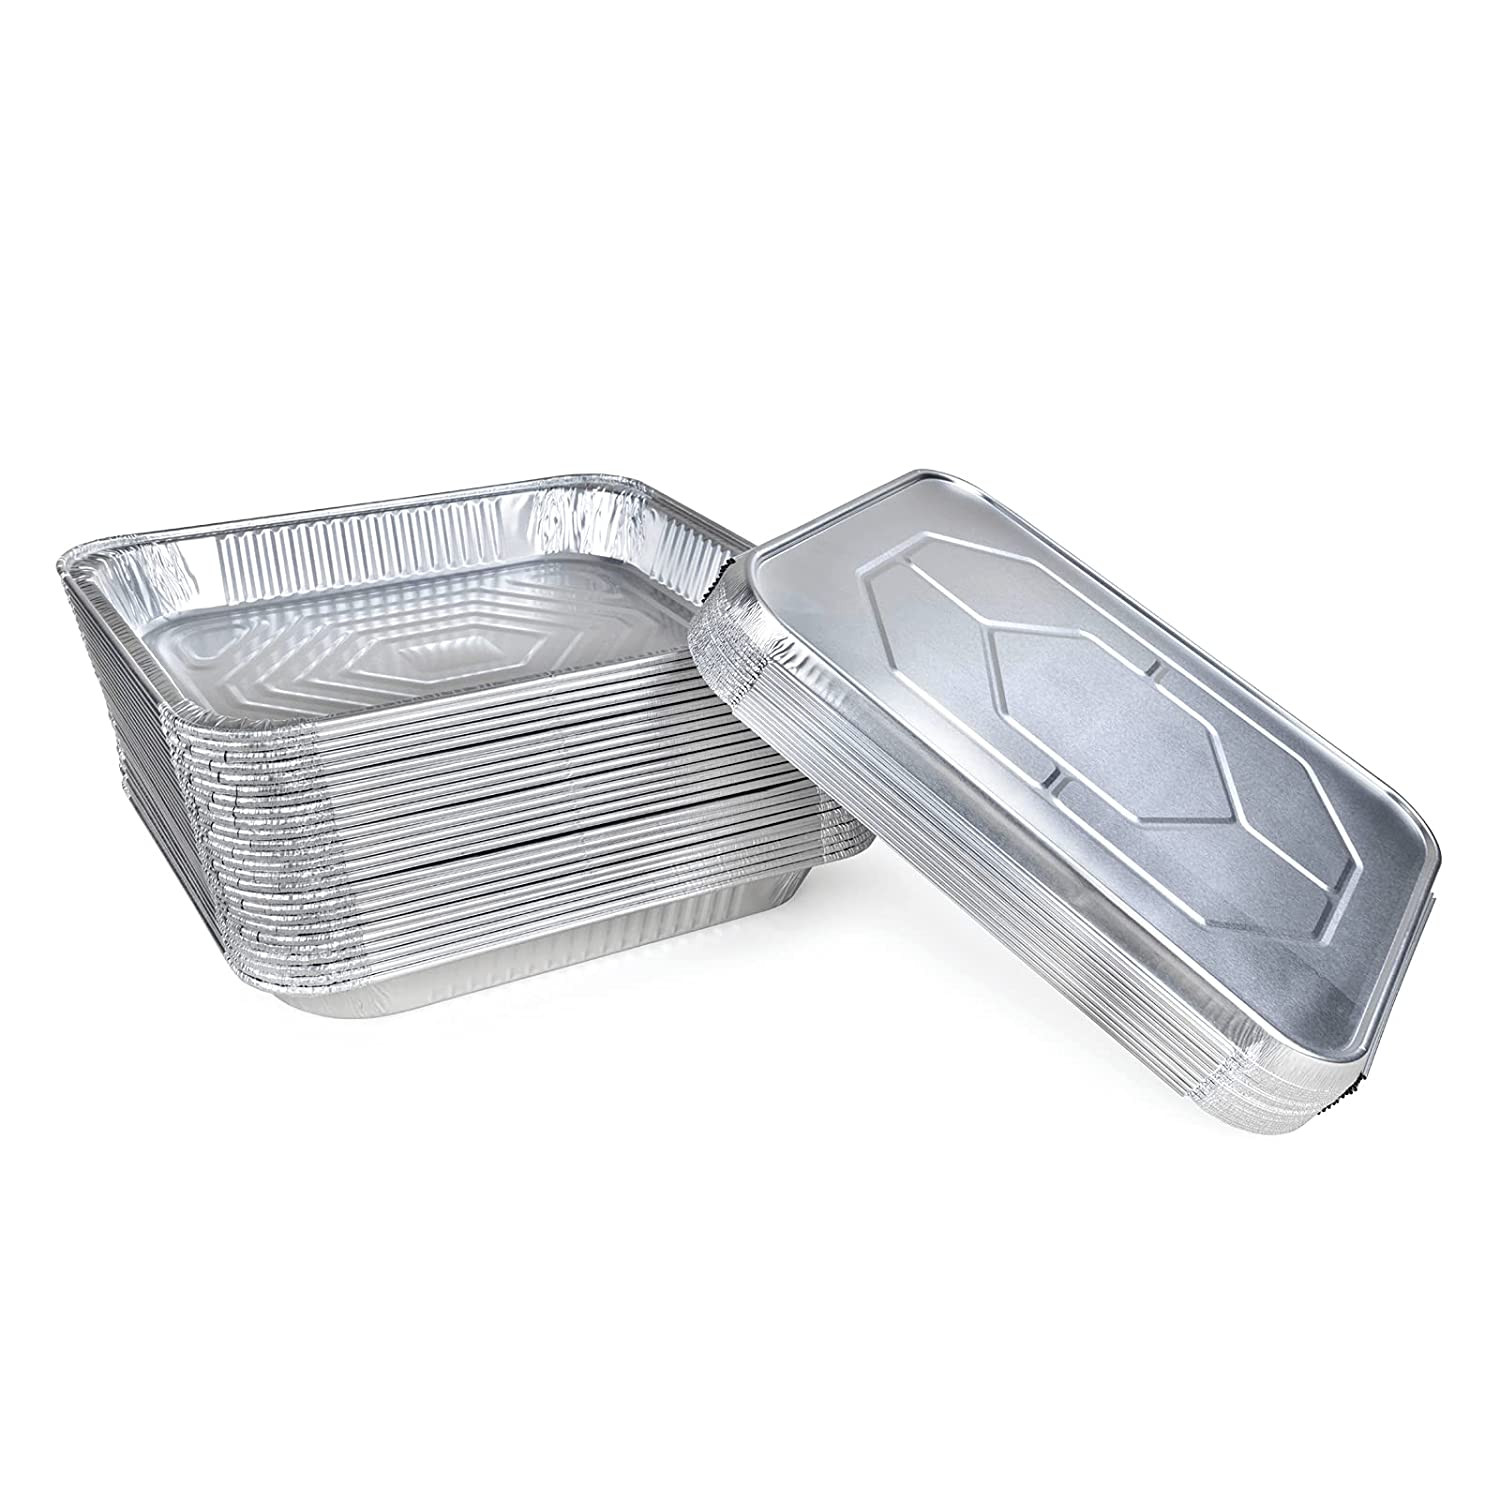 https://idlpack.com/image/cache/catalog/Products/Foil%20Pans%20and%20Trays/3%20half%20size-1500x1500.jpg